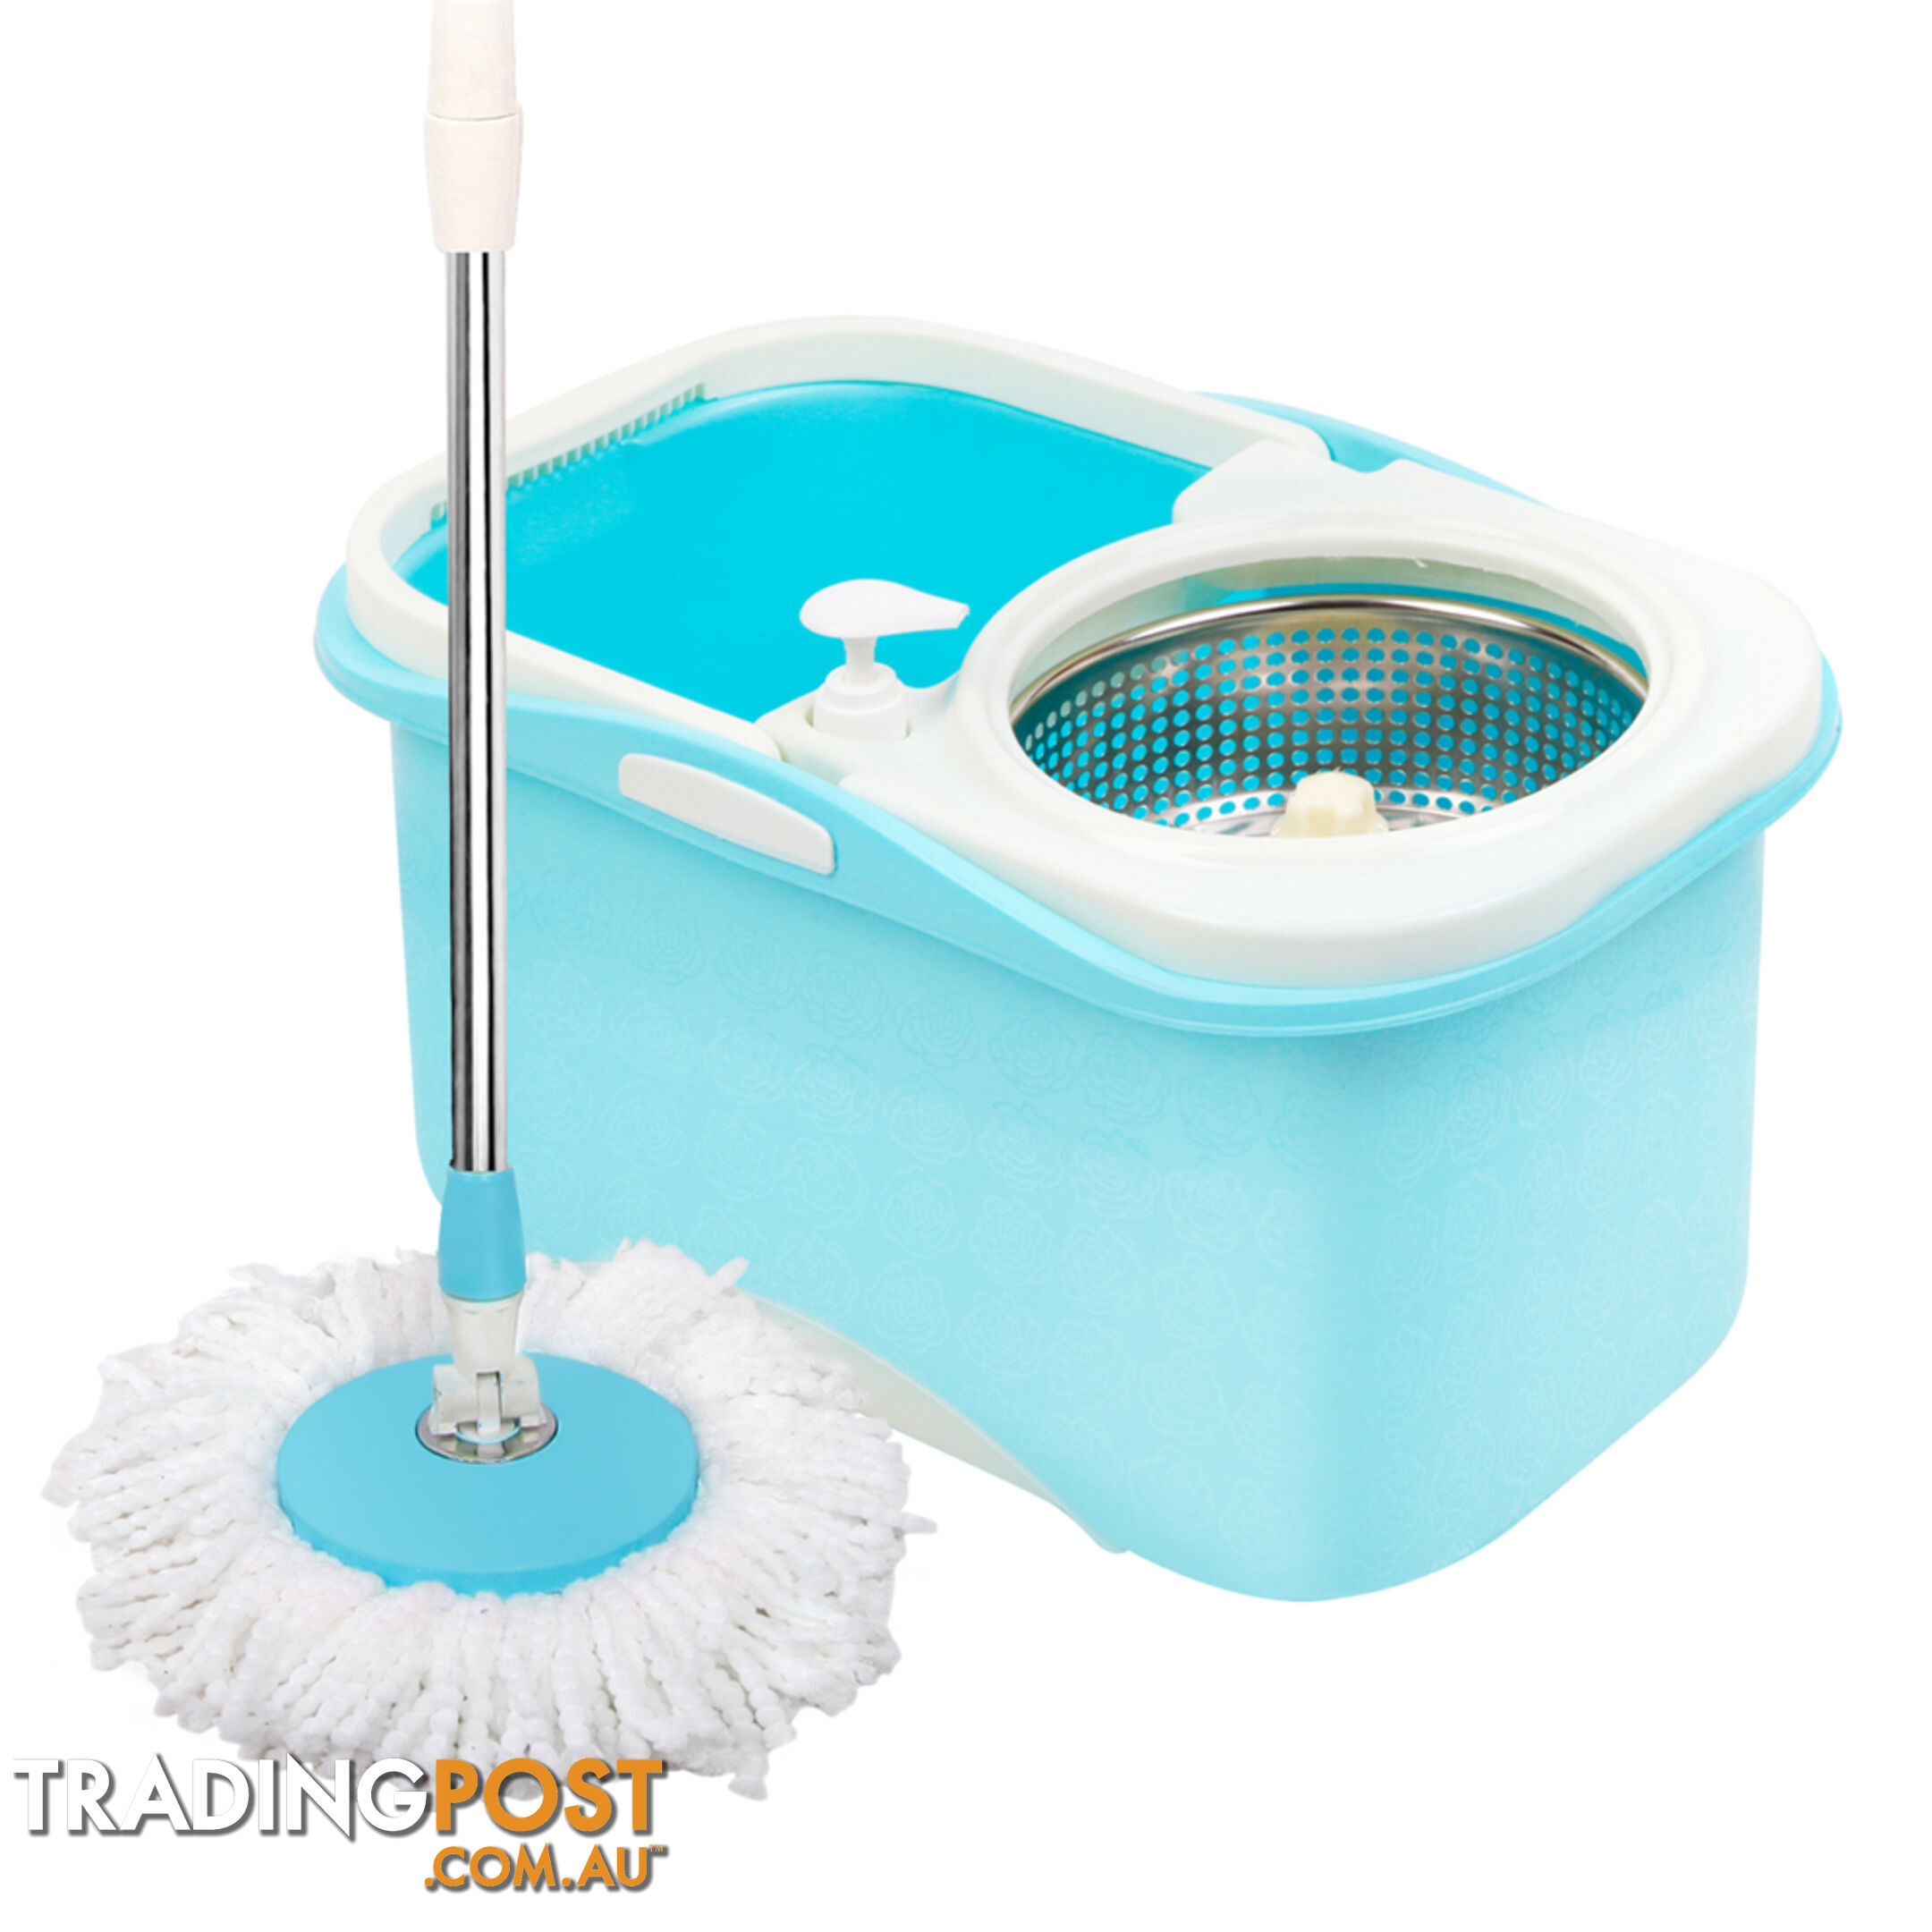 360 Degree Spinning Mop Stainless Steel Spin Dry Bucket w/ 2 Mop Heads 7.5L Blue